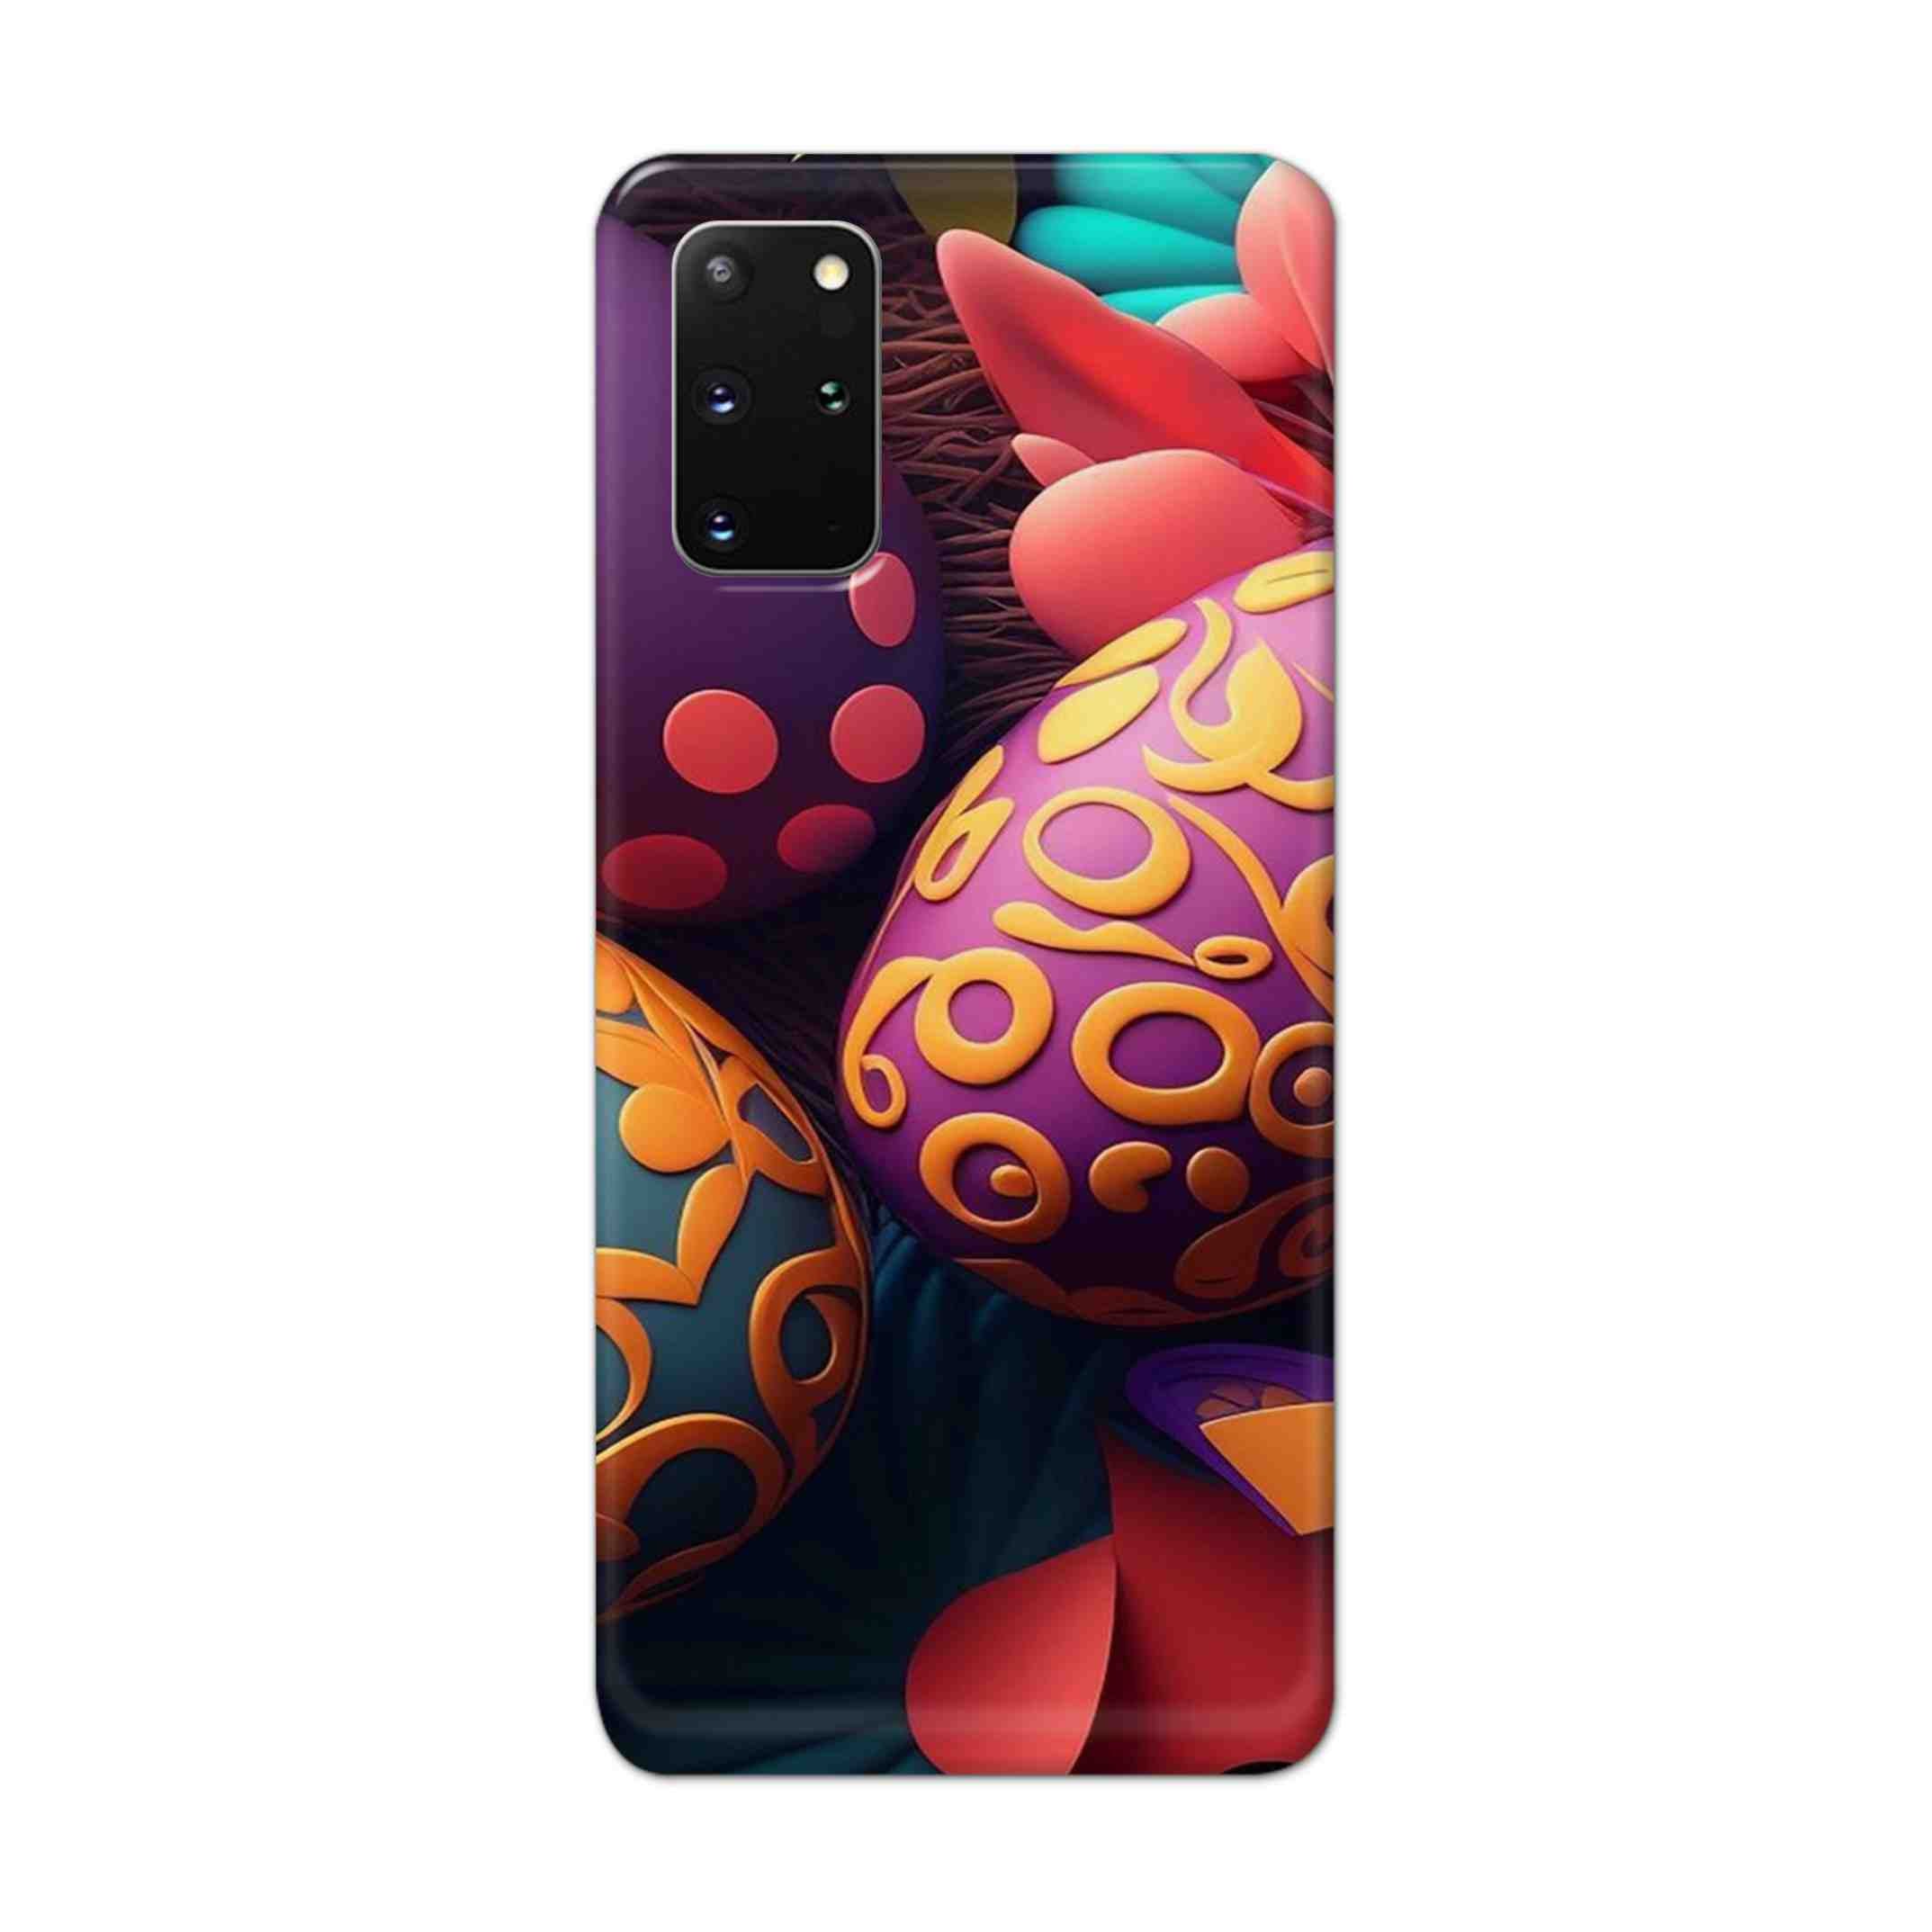 Buy Easter Egg Hard Back Mobile Phone Case Cover For Samsung Galaxy S20 Plus Online